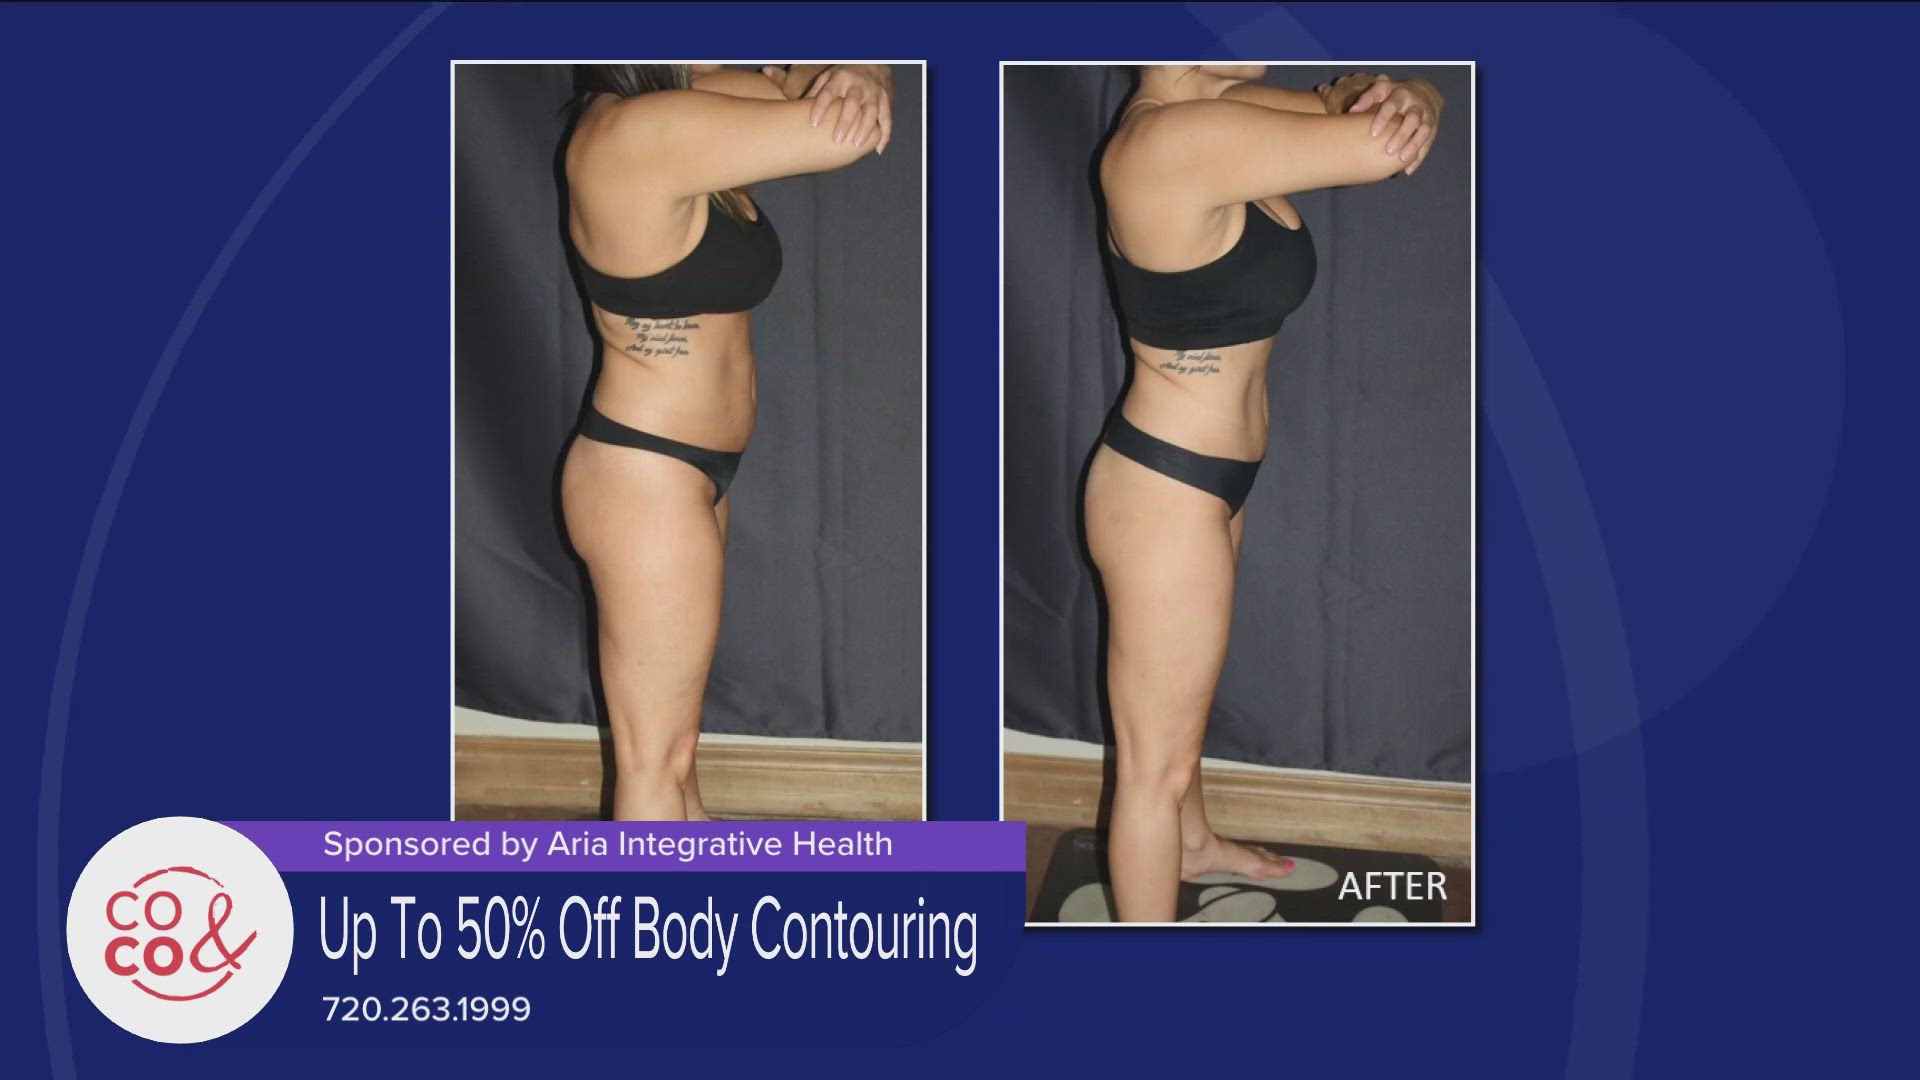 Call Aria Integrative Health at 720-263-1999 and enjoy up to 50% off body contouring packages. See their full menu of services at AriaIntegrativeHealth.com. *PAID*